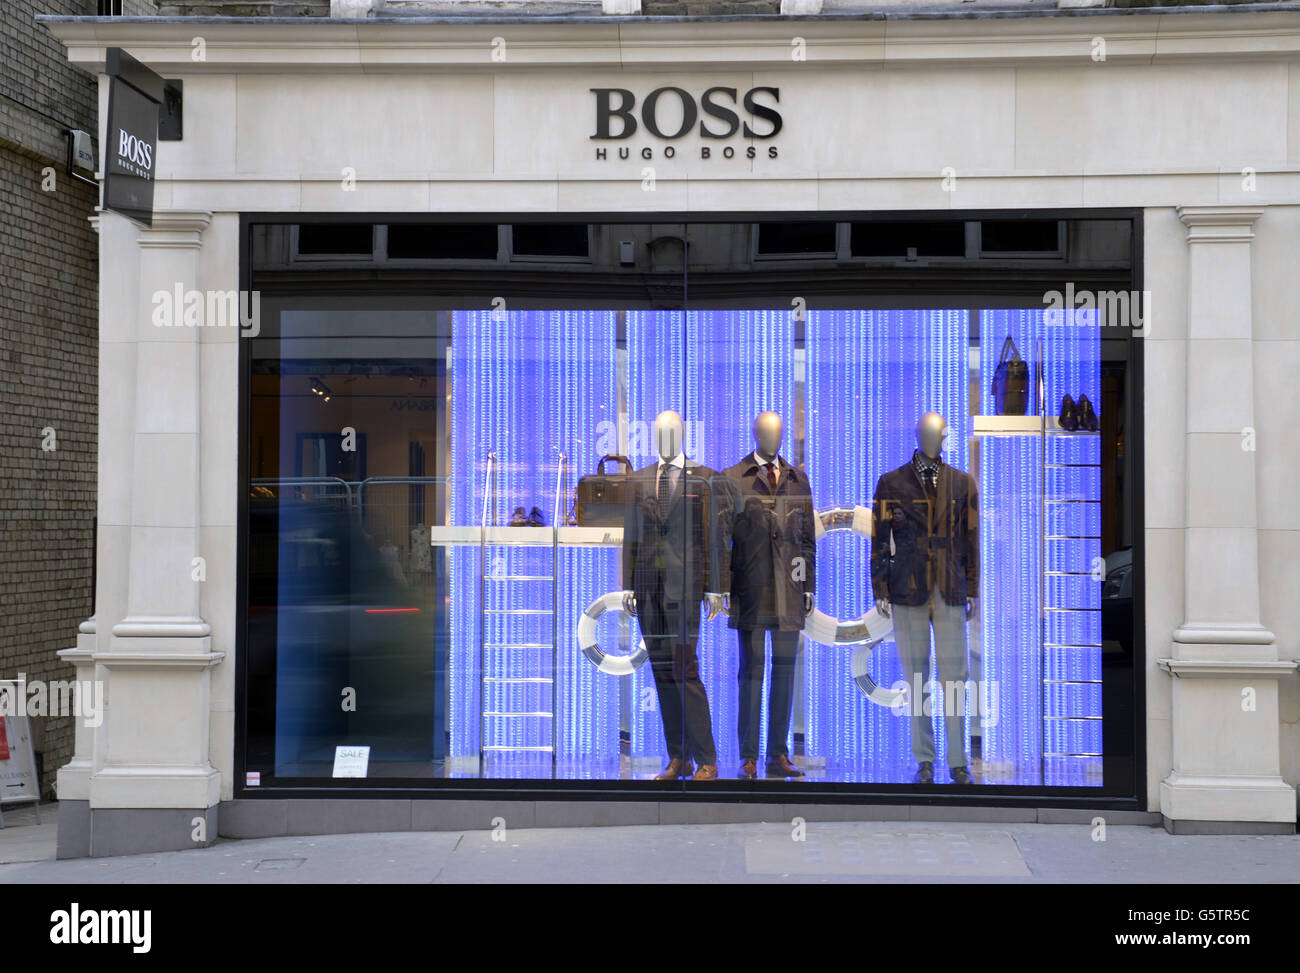 Stock image of the Hugo Boss shop in 